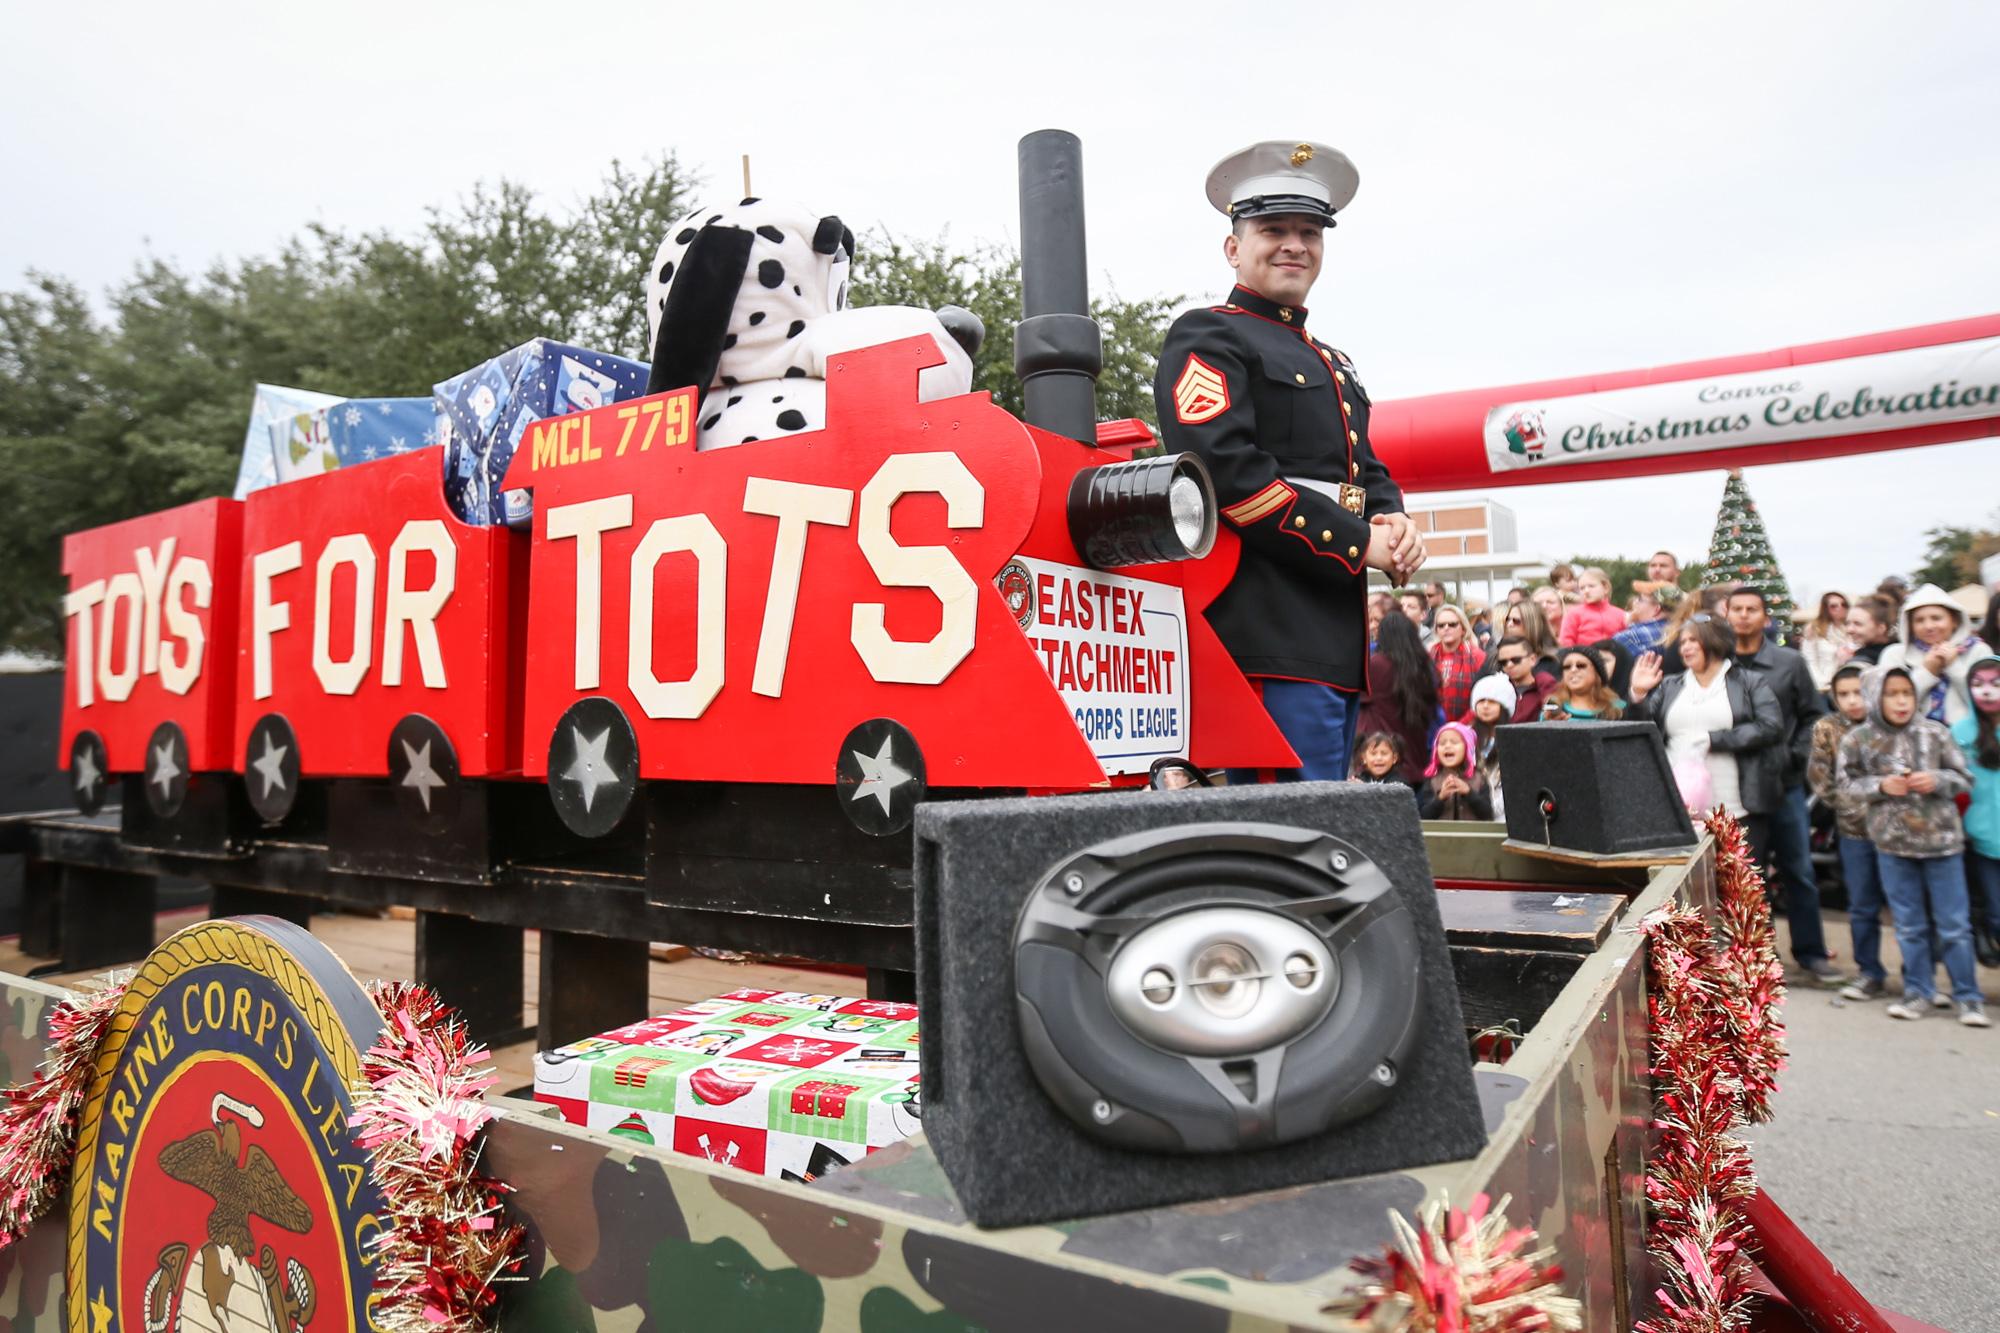 toys-for-tots-kicks-off-campaign-to-make-holidays-brighter-for-kids